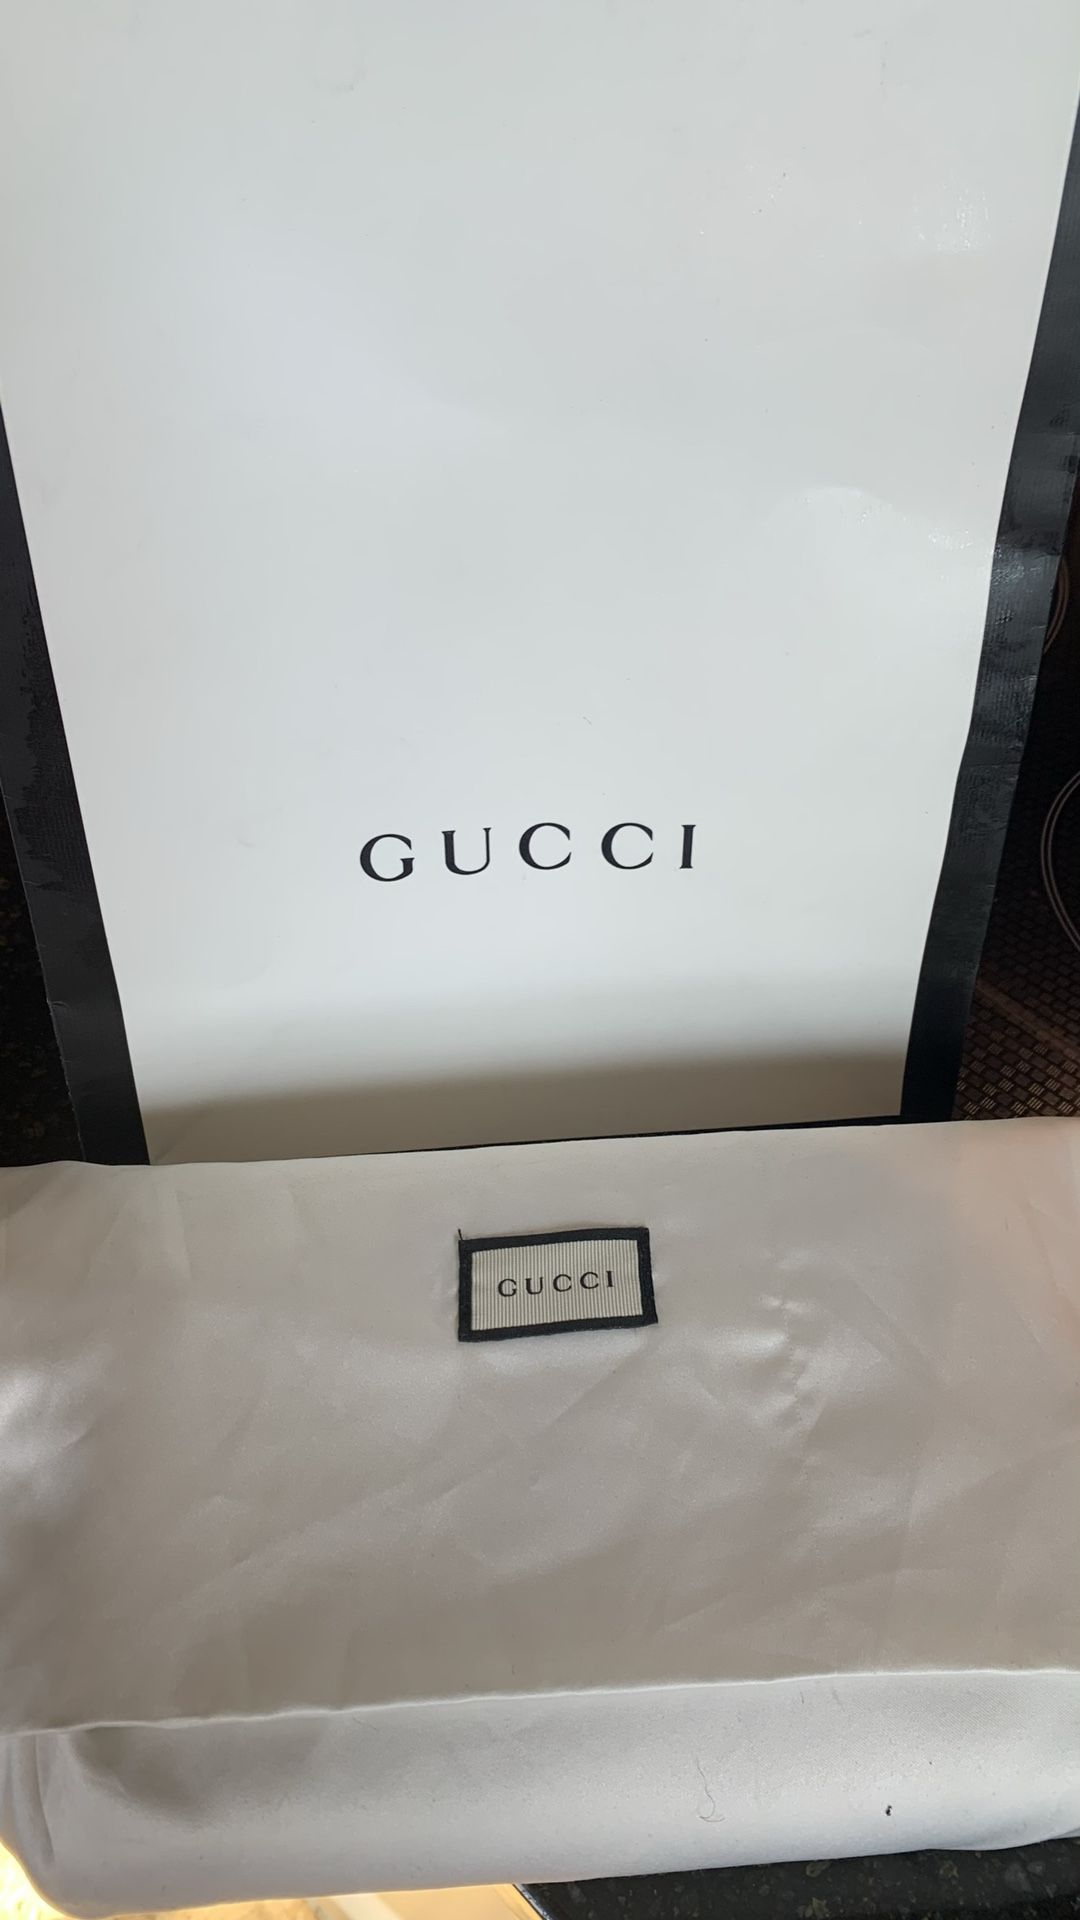 Authentic Gucci Bag Black Color With A Gold Chain